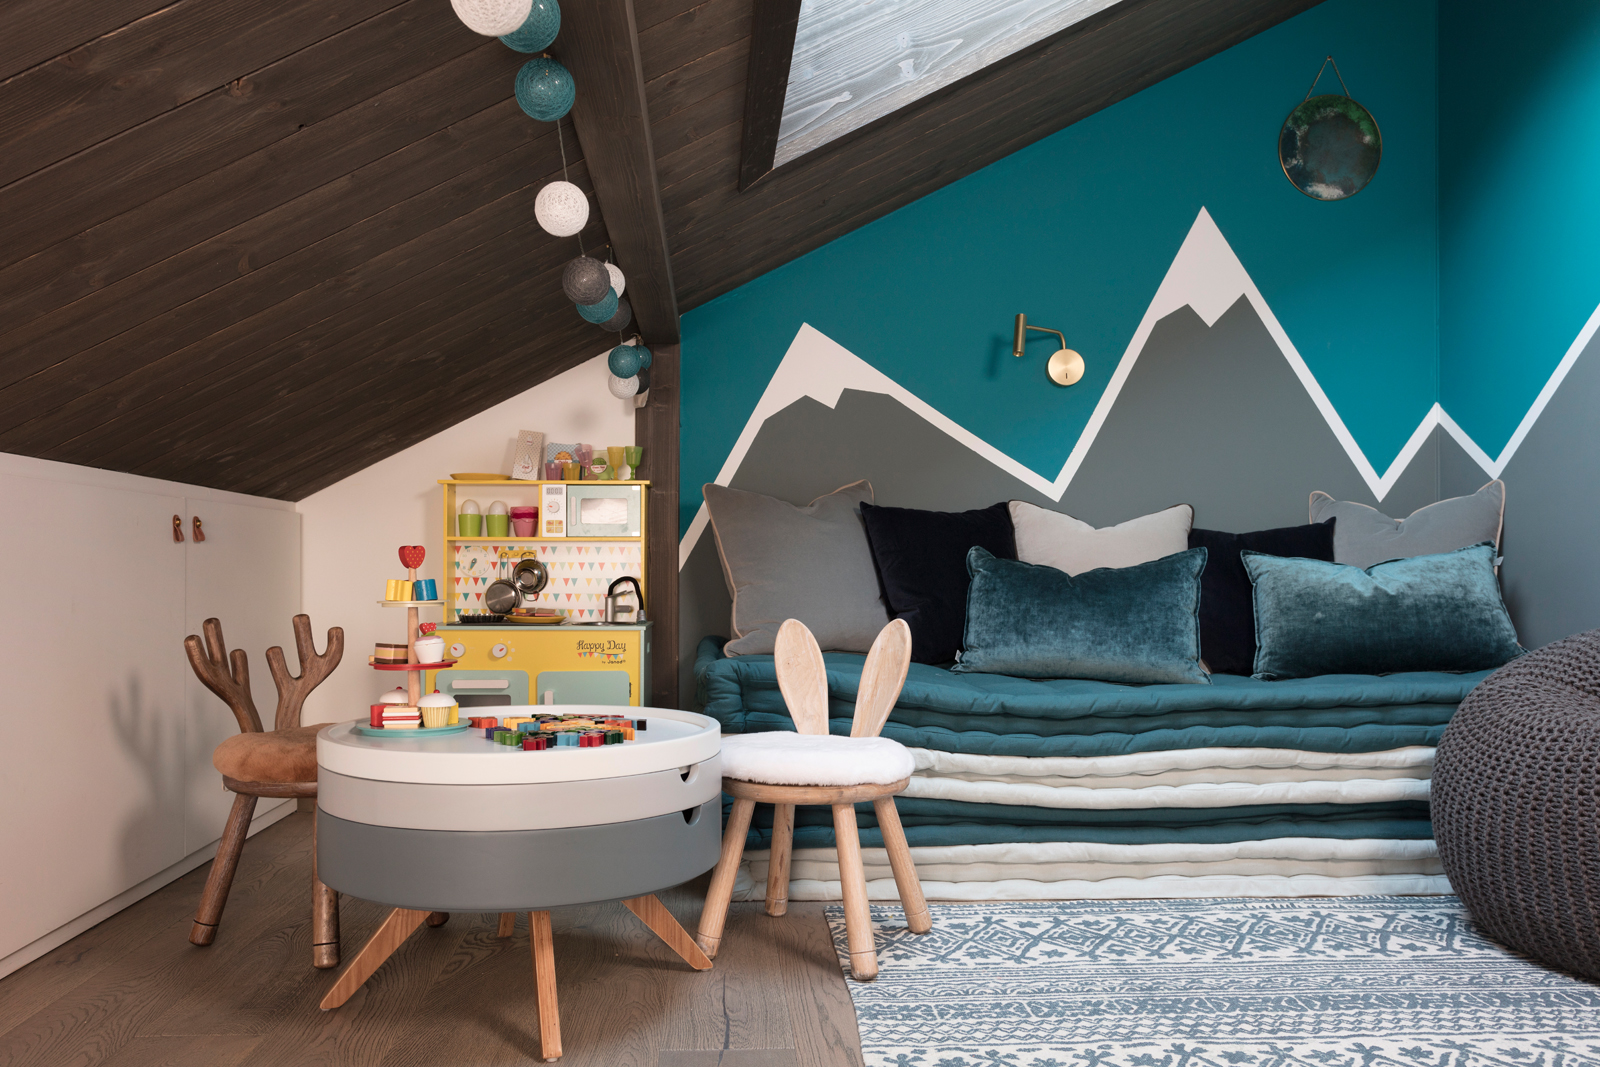 Chalet Mirabelle’s playroom